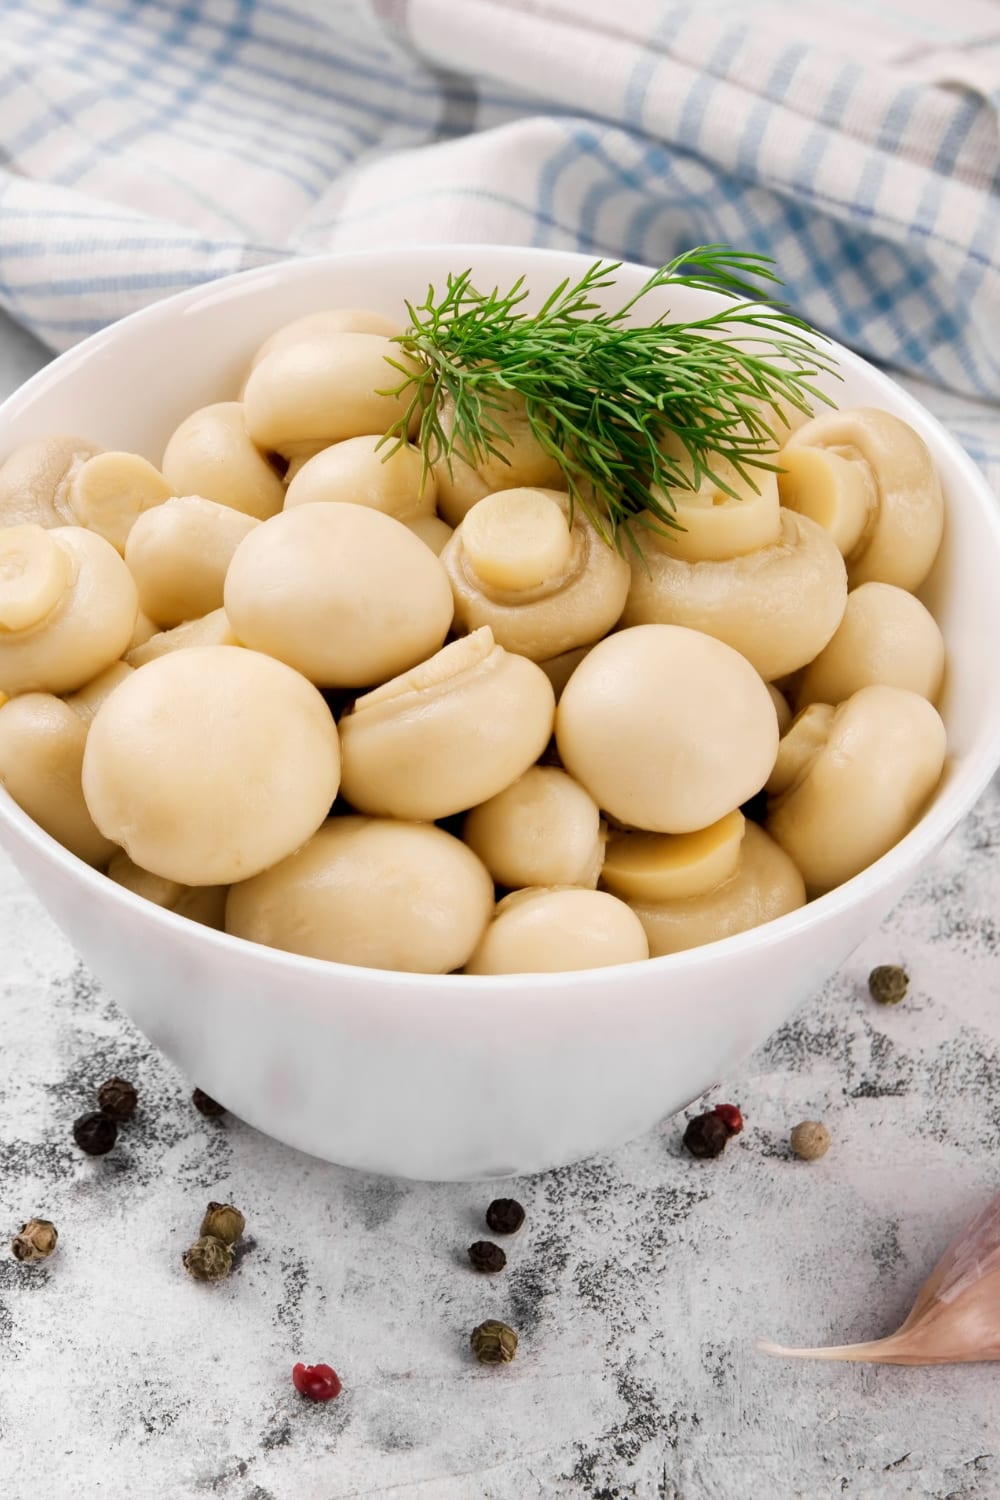 Pickled Mushrooms in a White Bowl with Spices